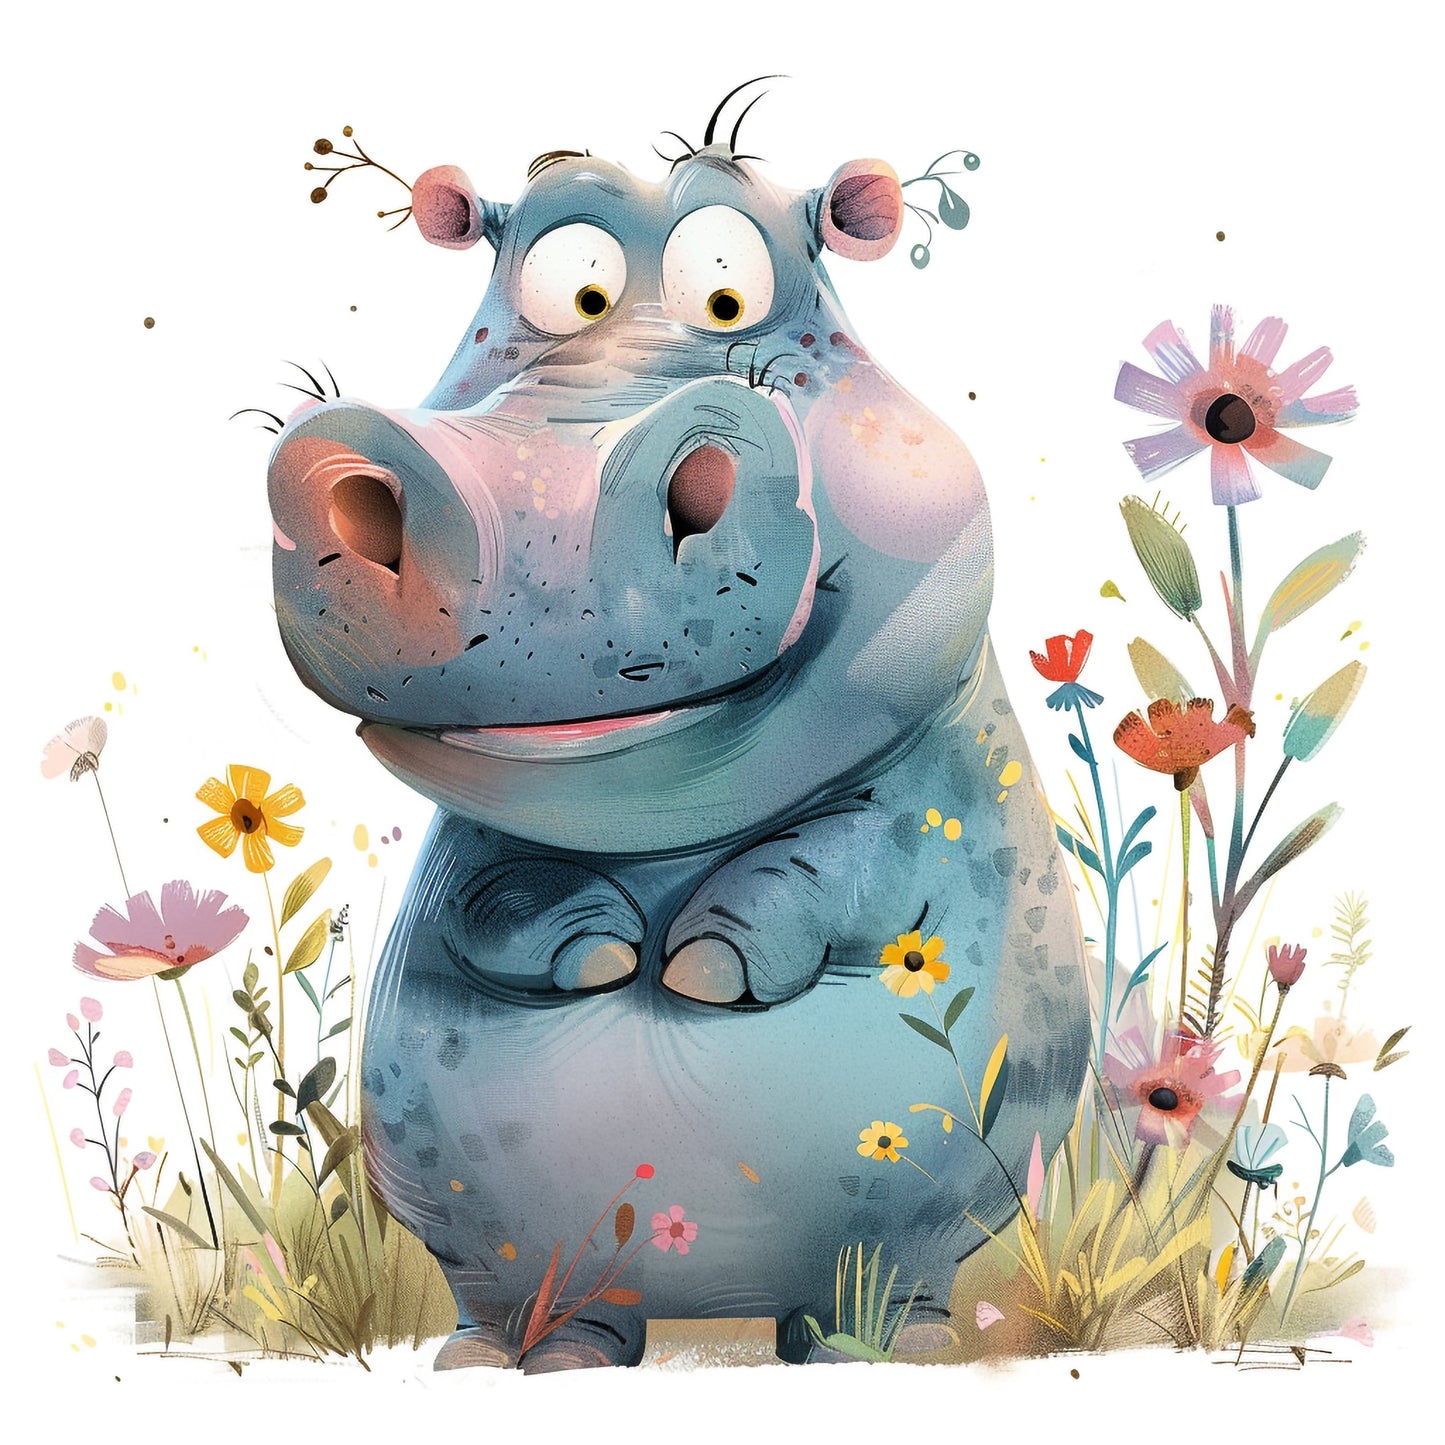 Cute Cartoon Hippo with a Warm Smile in a Flower Field